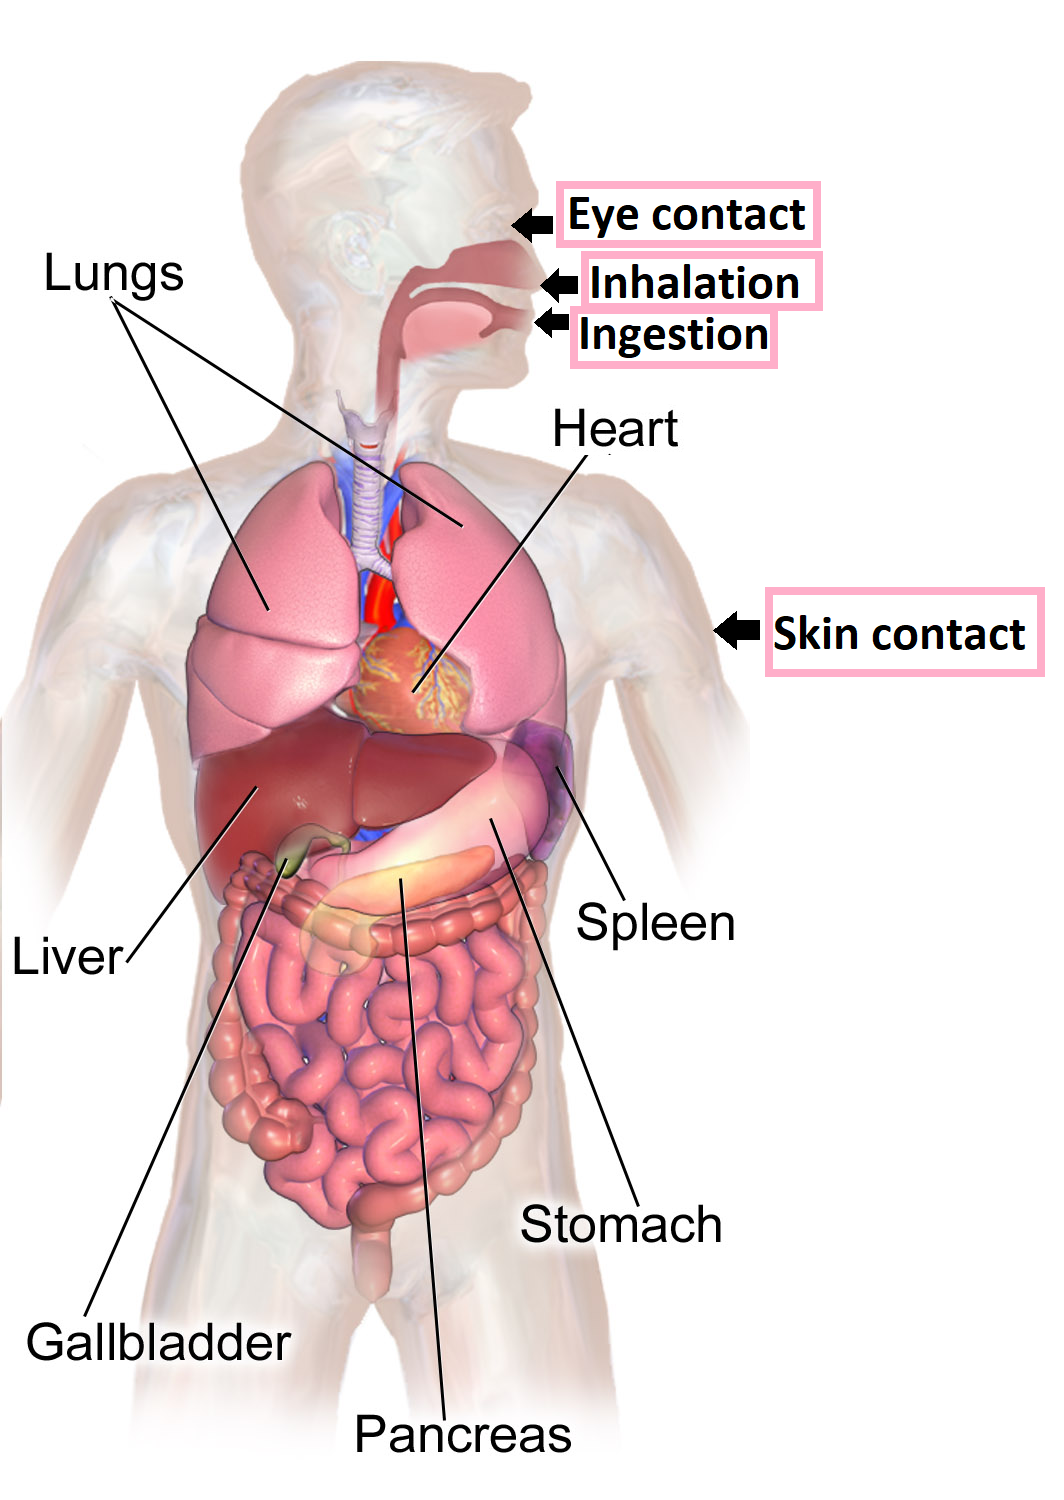 The major organs of the body are diagrammed with arrows labeling the three routes of exposure